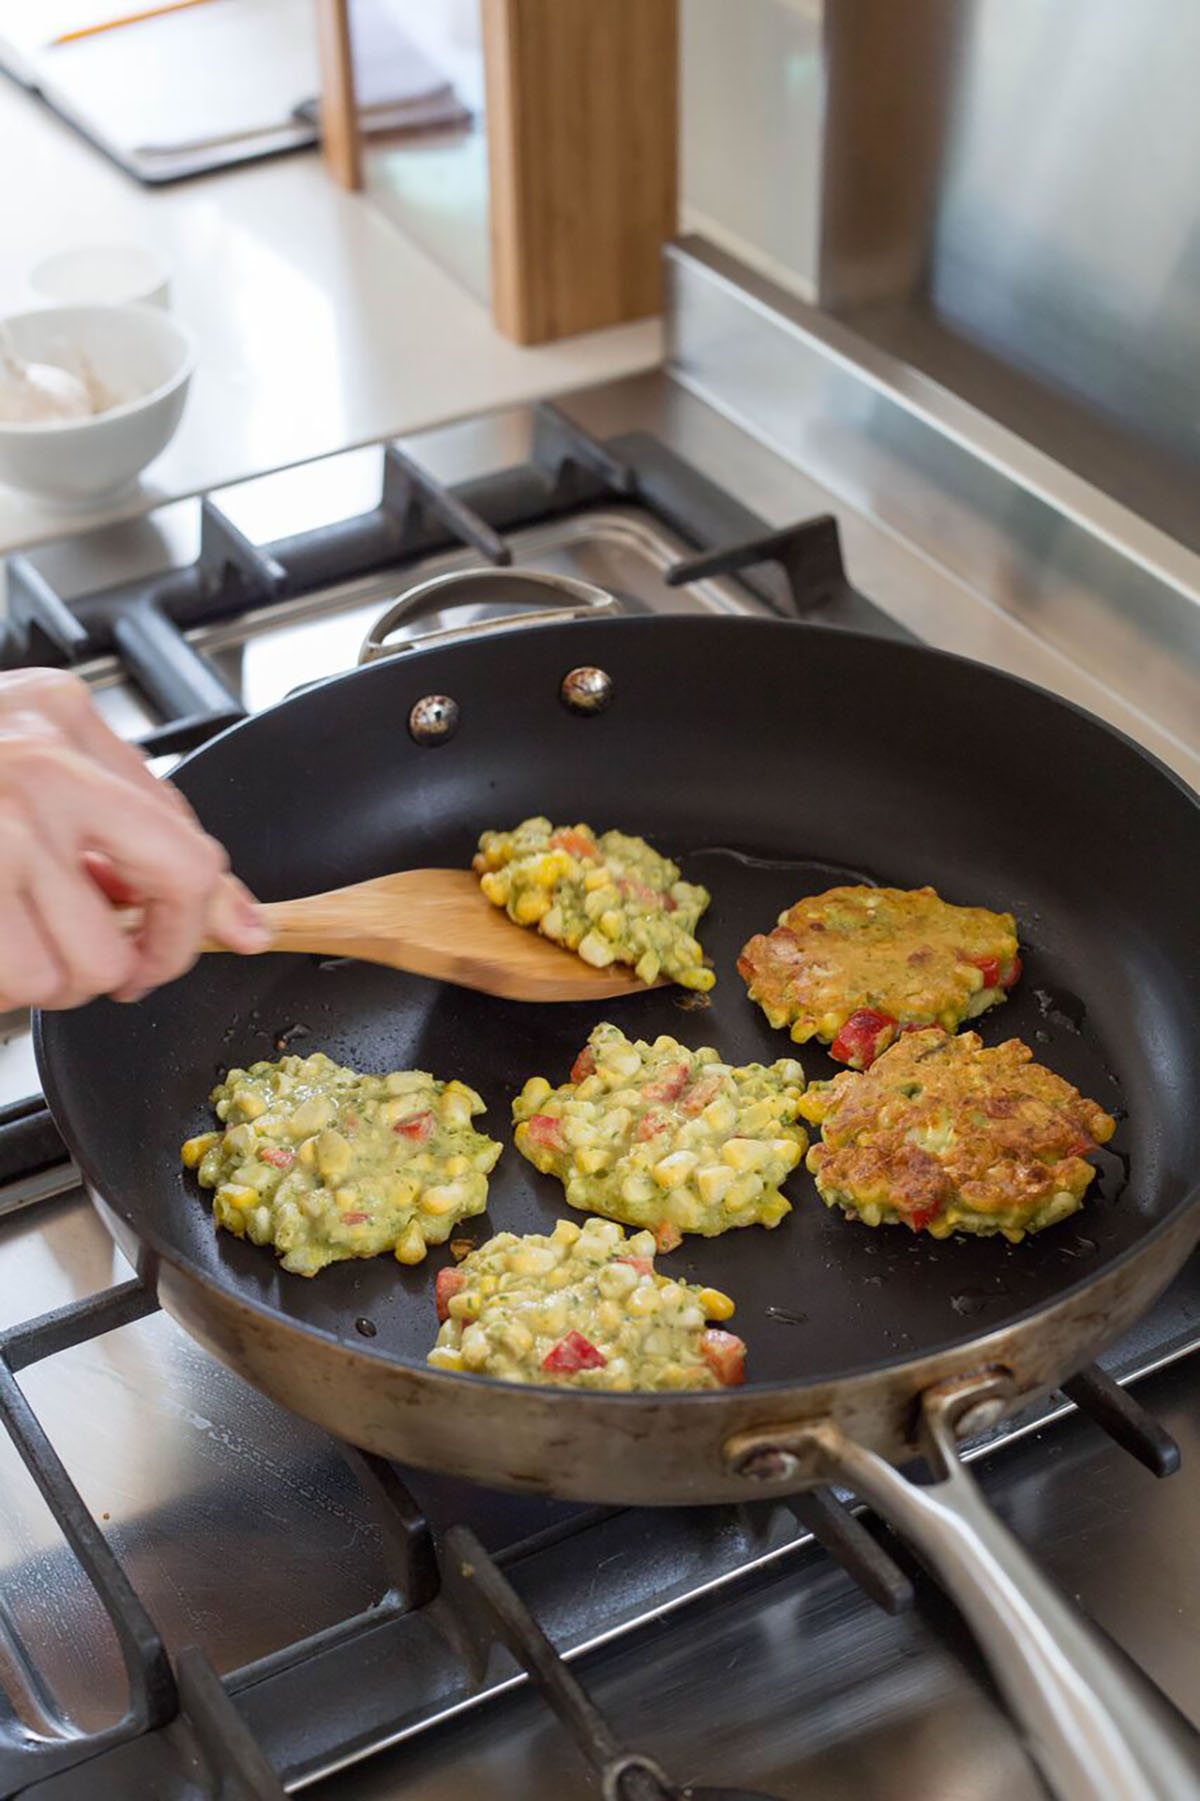 Corn, Capsicum and Chilli Fritters recipe by Buffy Ellen of Be Good Organics - vegan and gluten free!